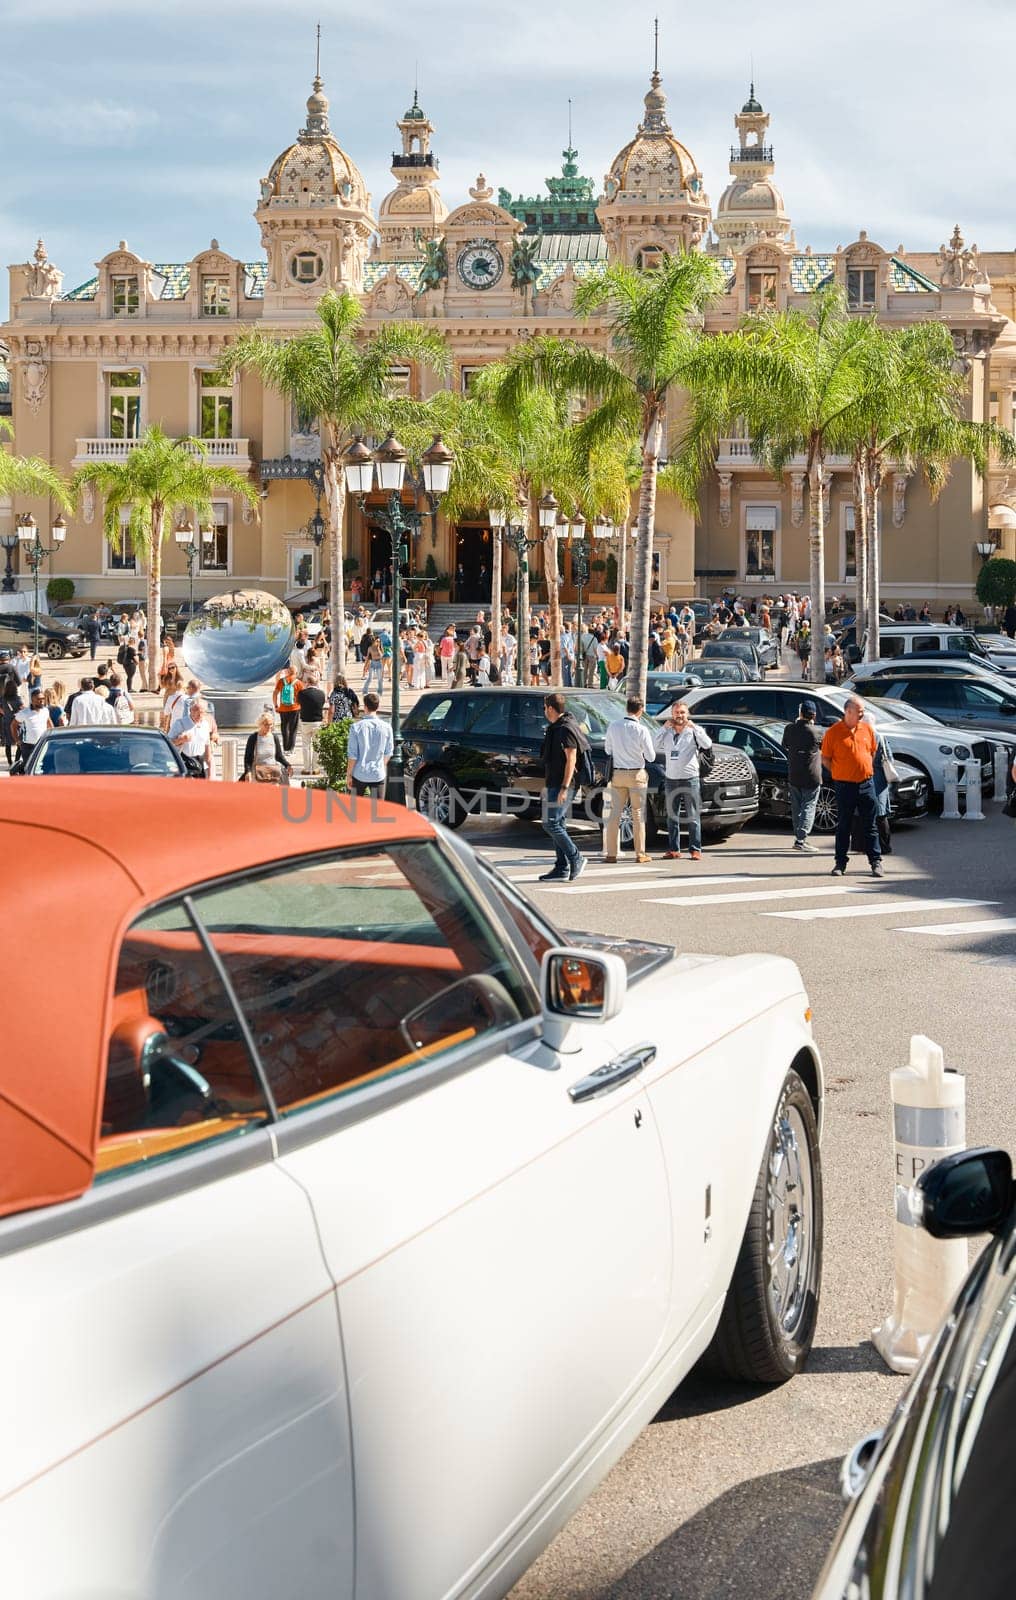 Monaco, Monte-Carlo, 29 September 2022 - Famous square Casino Monte-Carlo at sunny day, the red roof of a Rolls Royce convertible, luxury cars, wealth life, tourists take pictures of the landmark by vladimirdrozdin